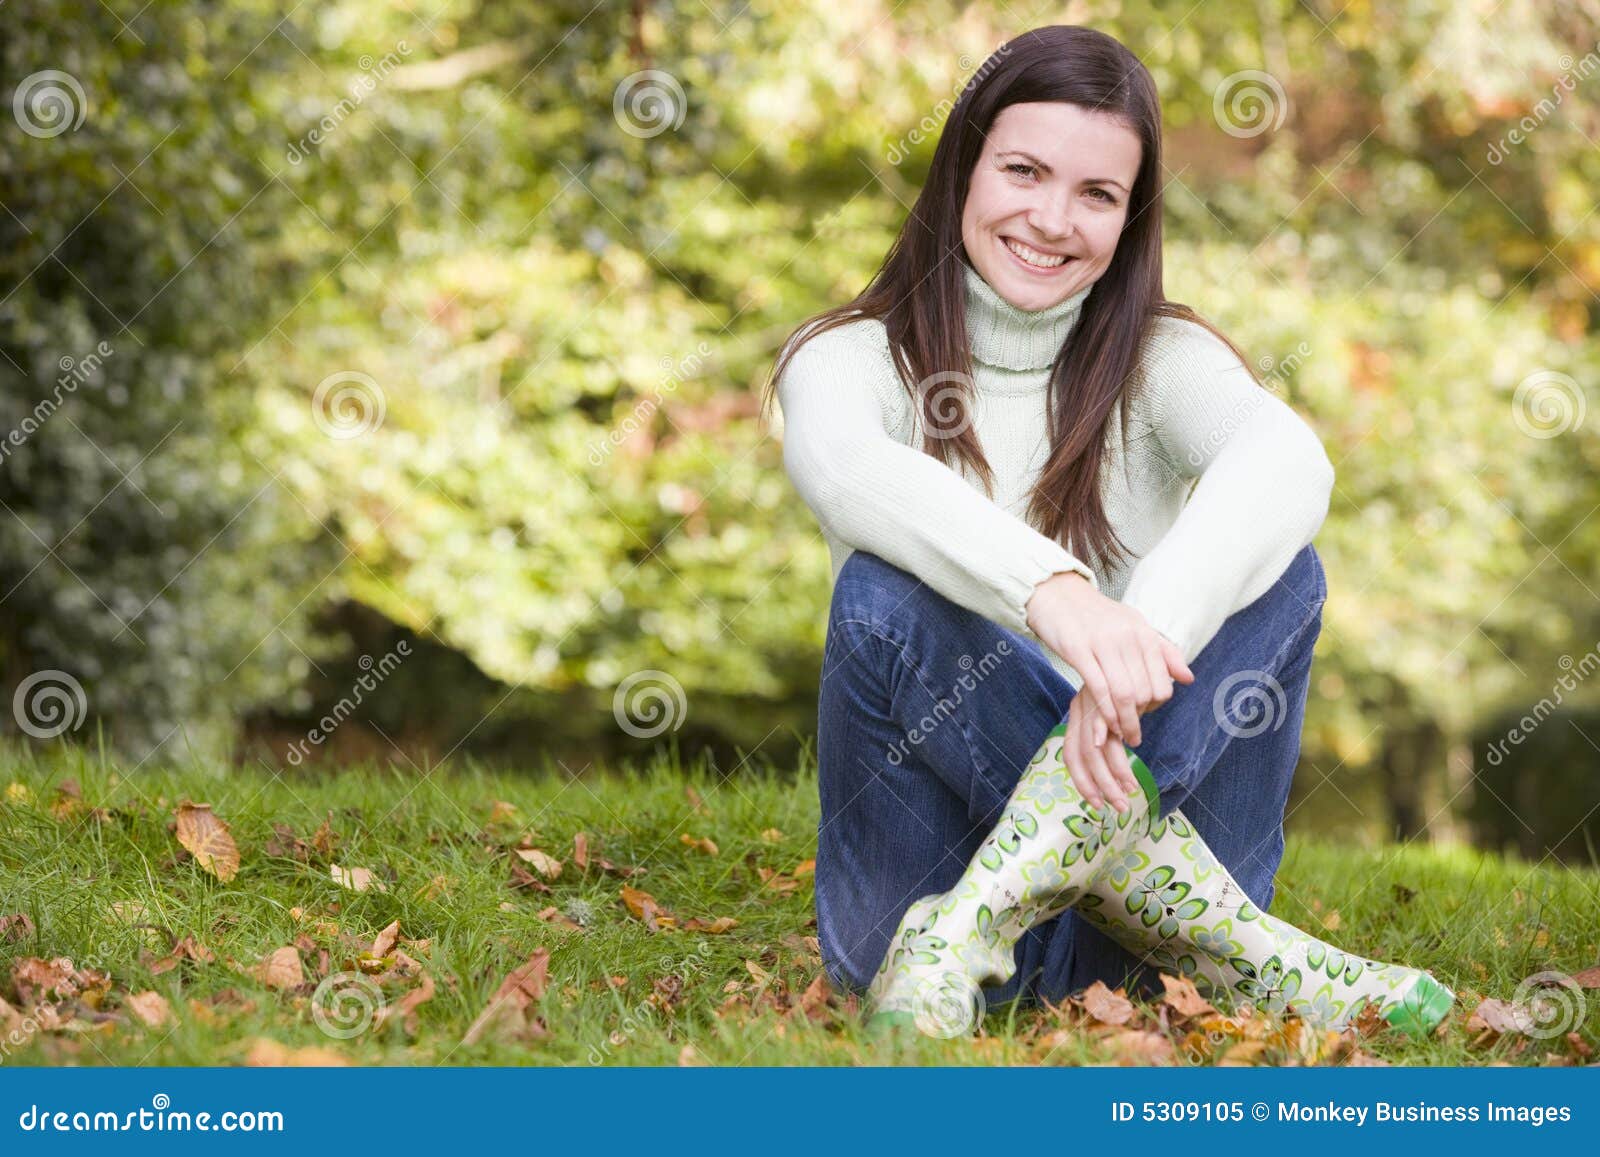 Young Woman Sitting Amongst Trees Stock Image - Image of resting ...